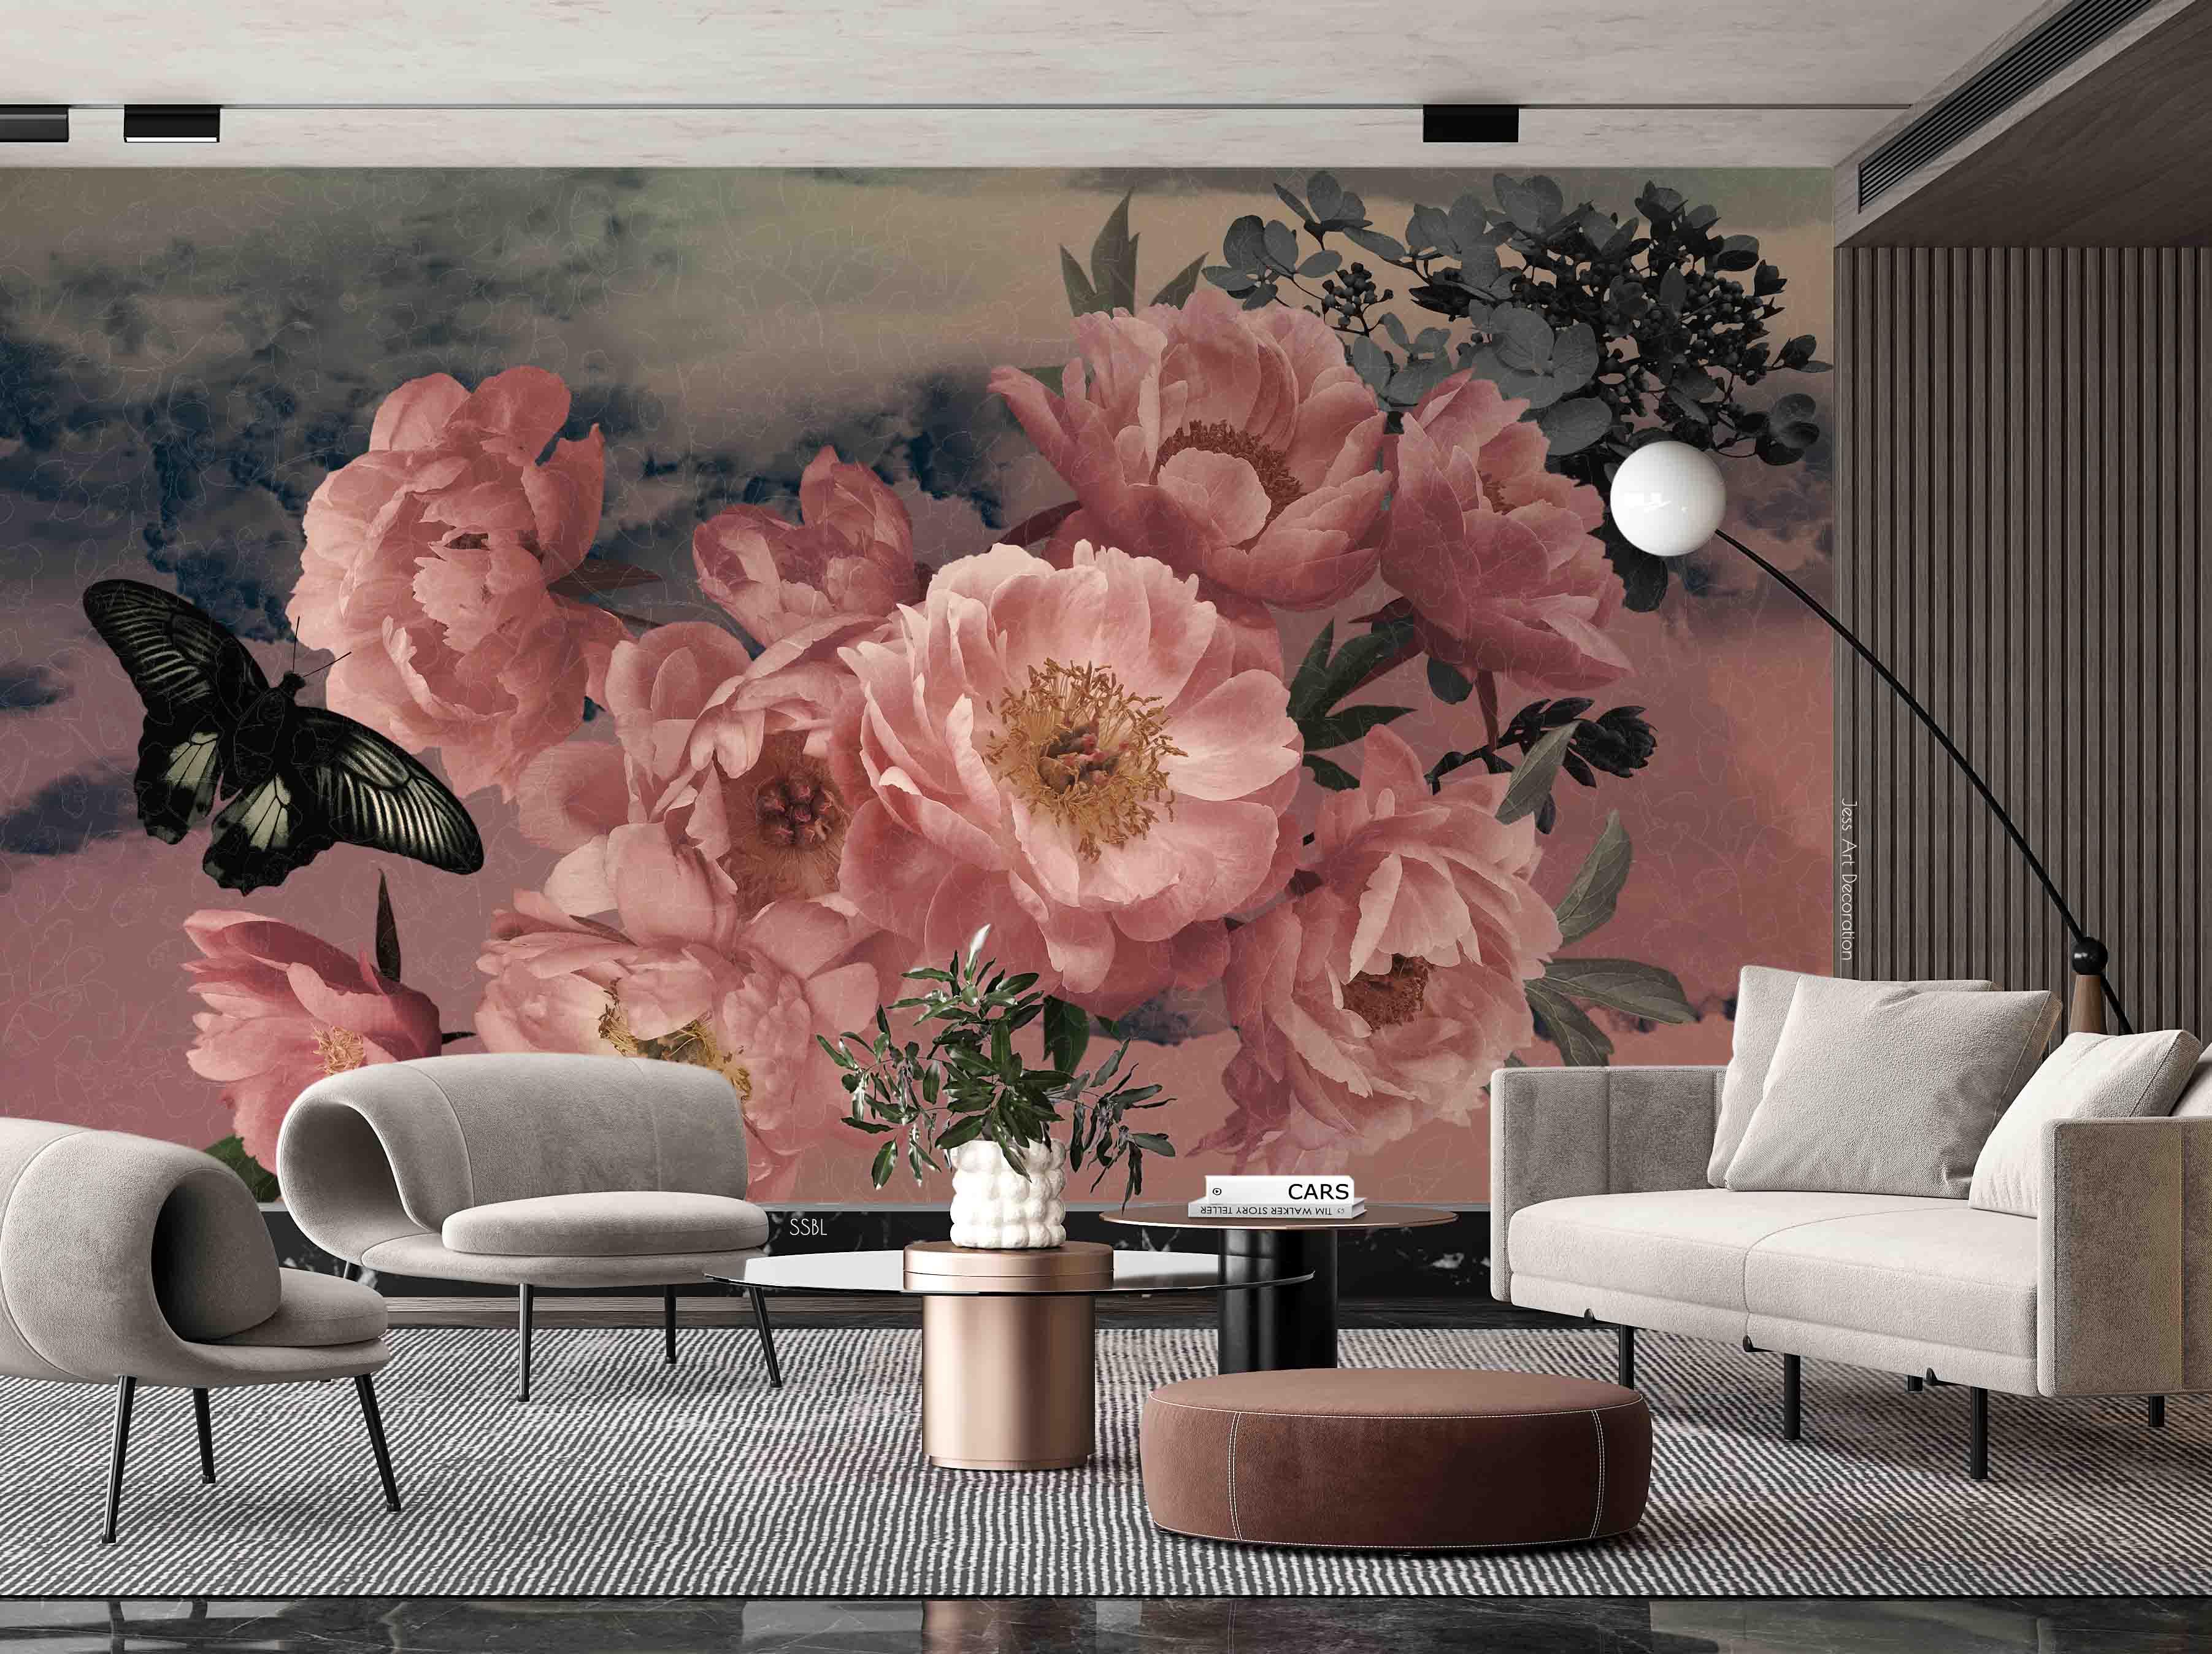 3D Vintage Baroque Art Blooming Pink Peony Black Butterfly Background Wall Mural Wallpaper GD 3566- Jess Art Decoration